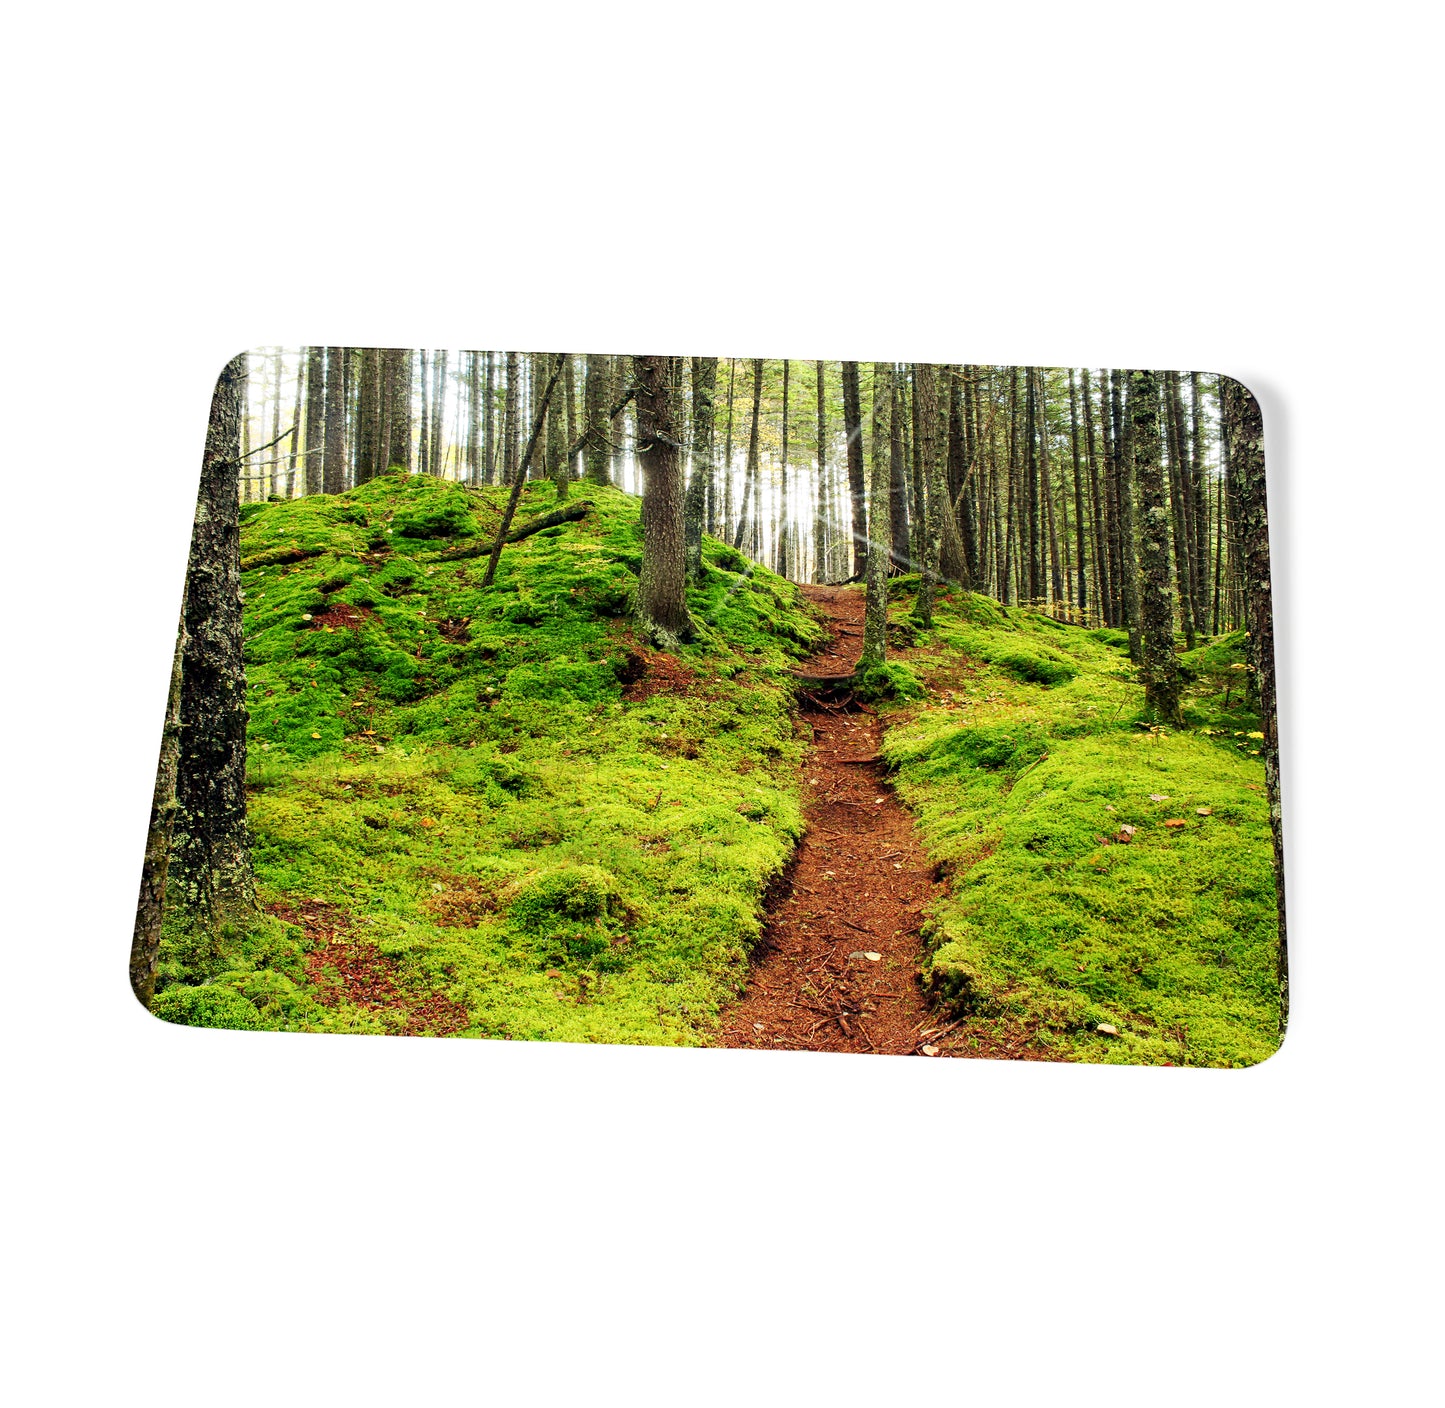 Pittsburg Fairytale Forest Cutting Board by Chris Whiton